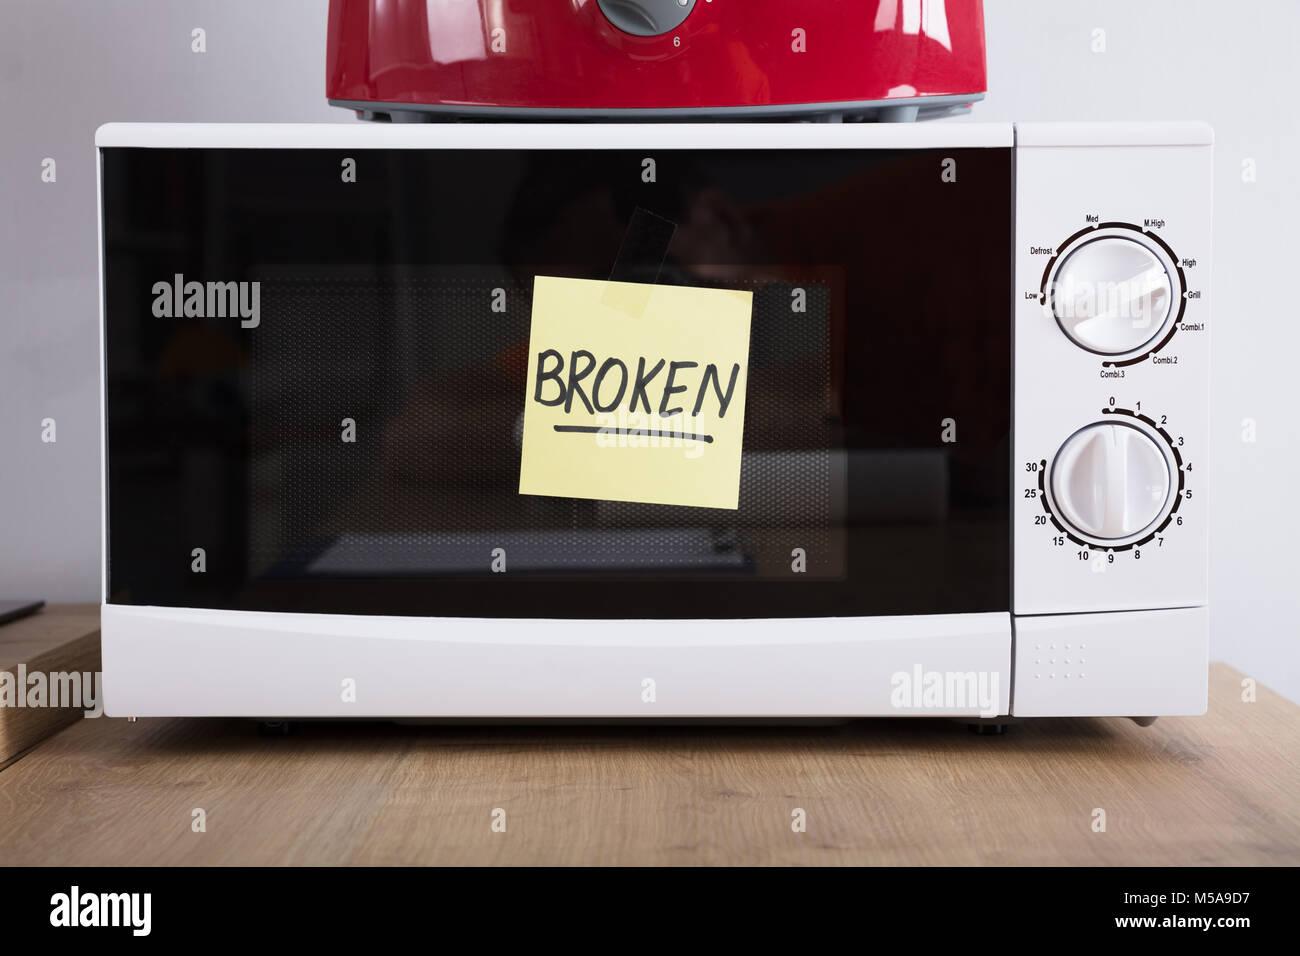 Close-up Of A Microwave Oven With Adhesive Notes Showing Broken Text Stock Photo